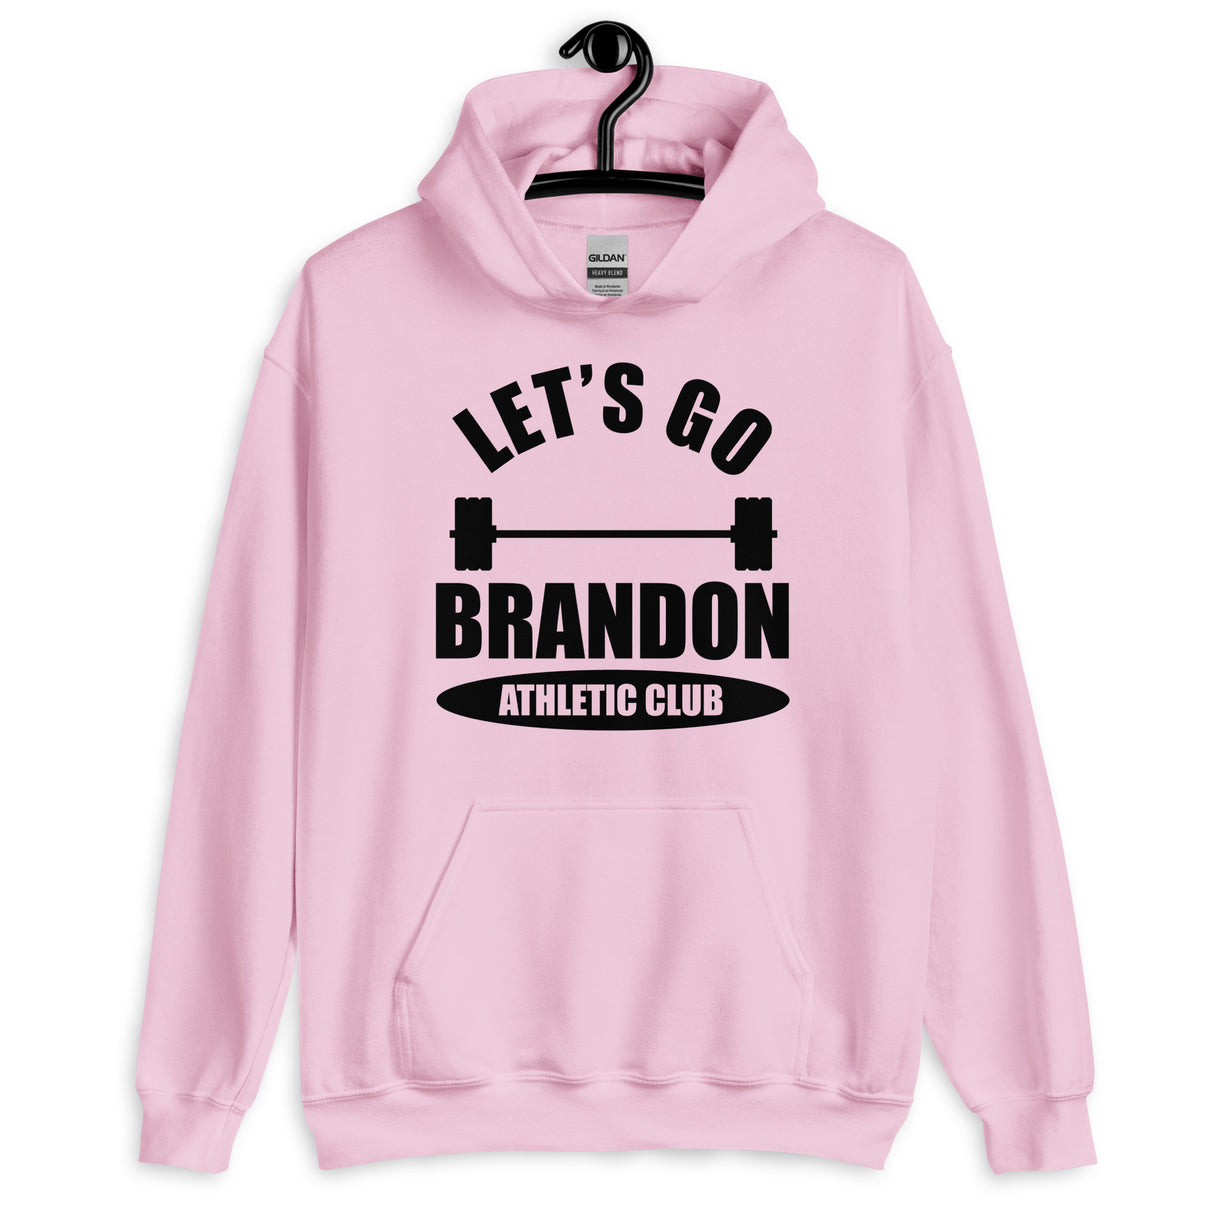 Let's Go Brandon Athletic Club Hoodie - Libertarian Country